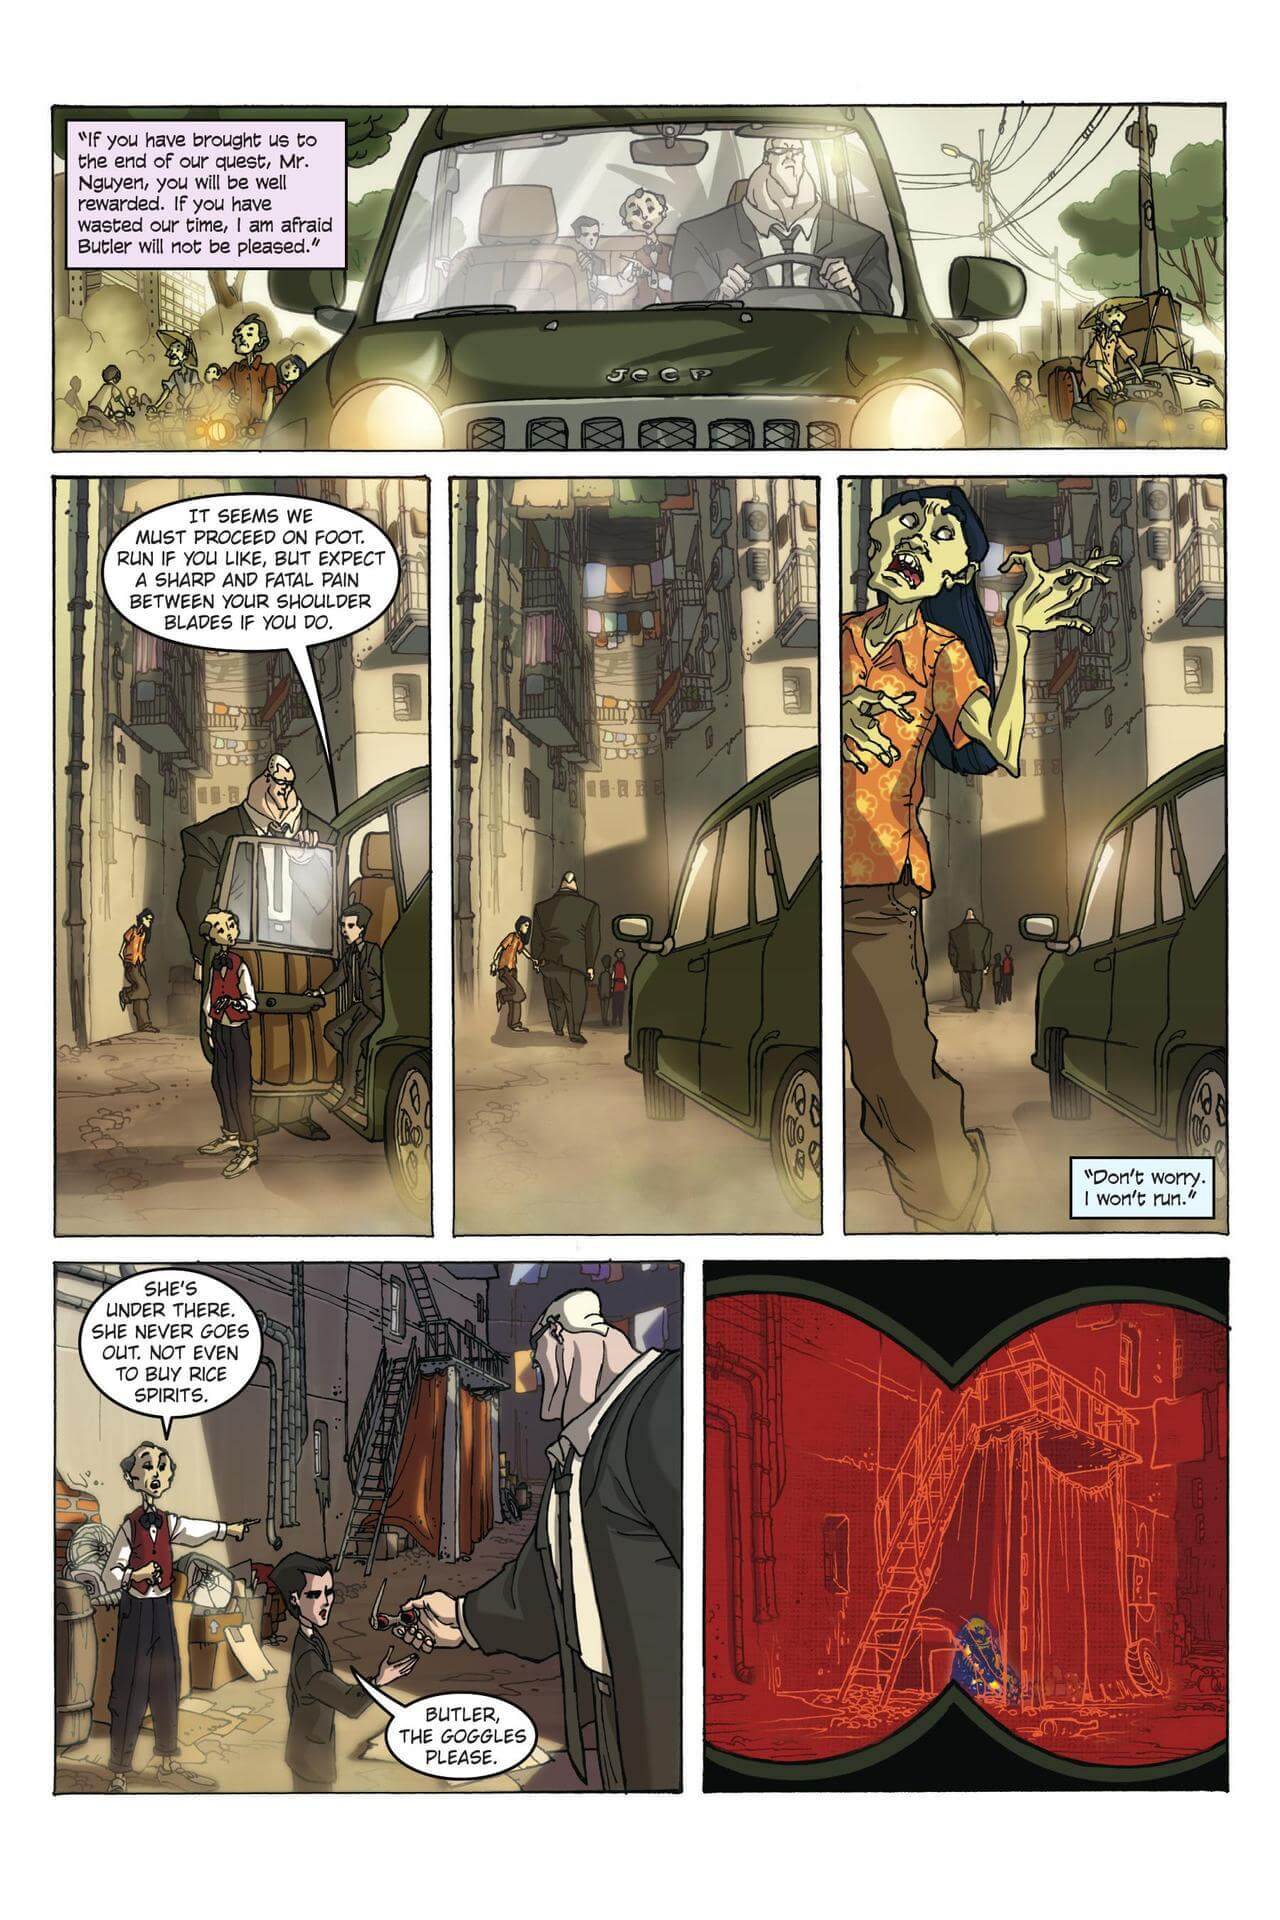 page 5 of artemis fowl the graphic novel